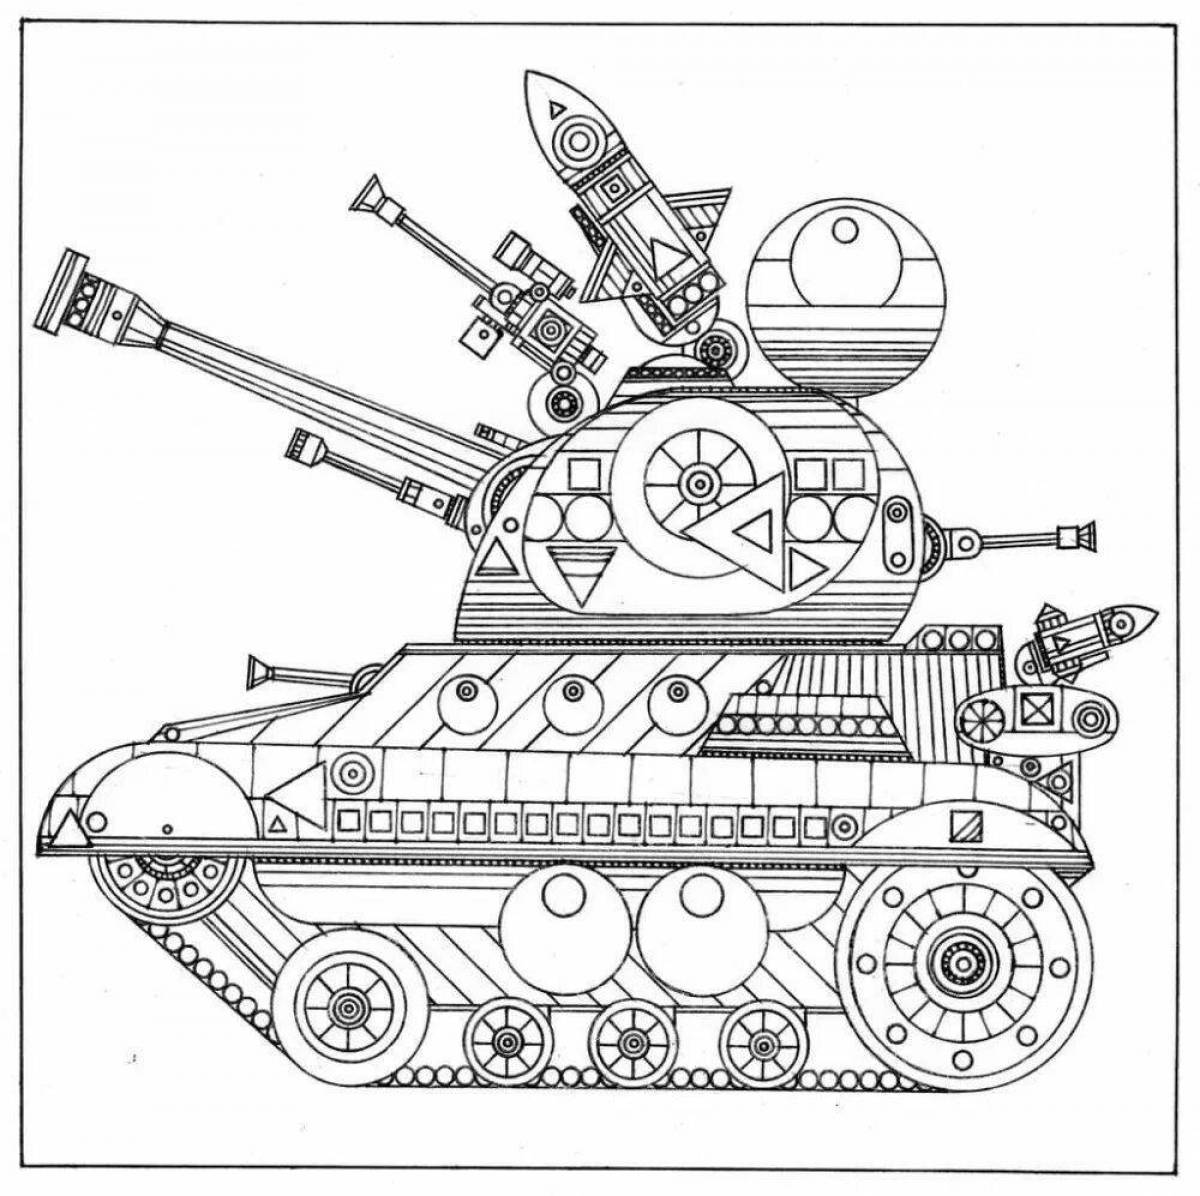 Exciting coloring tank kv-45